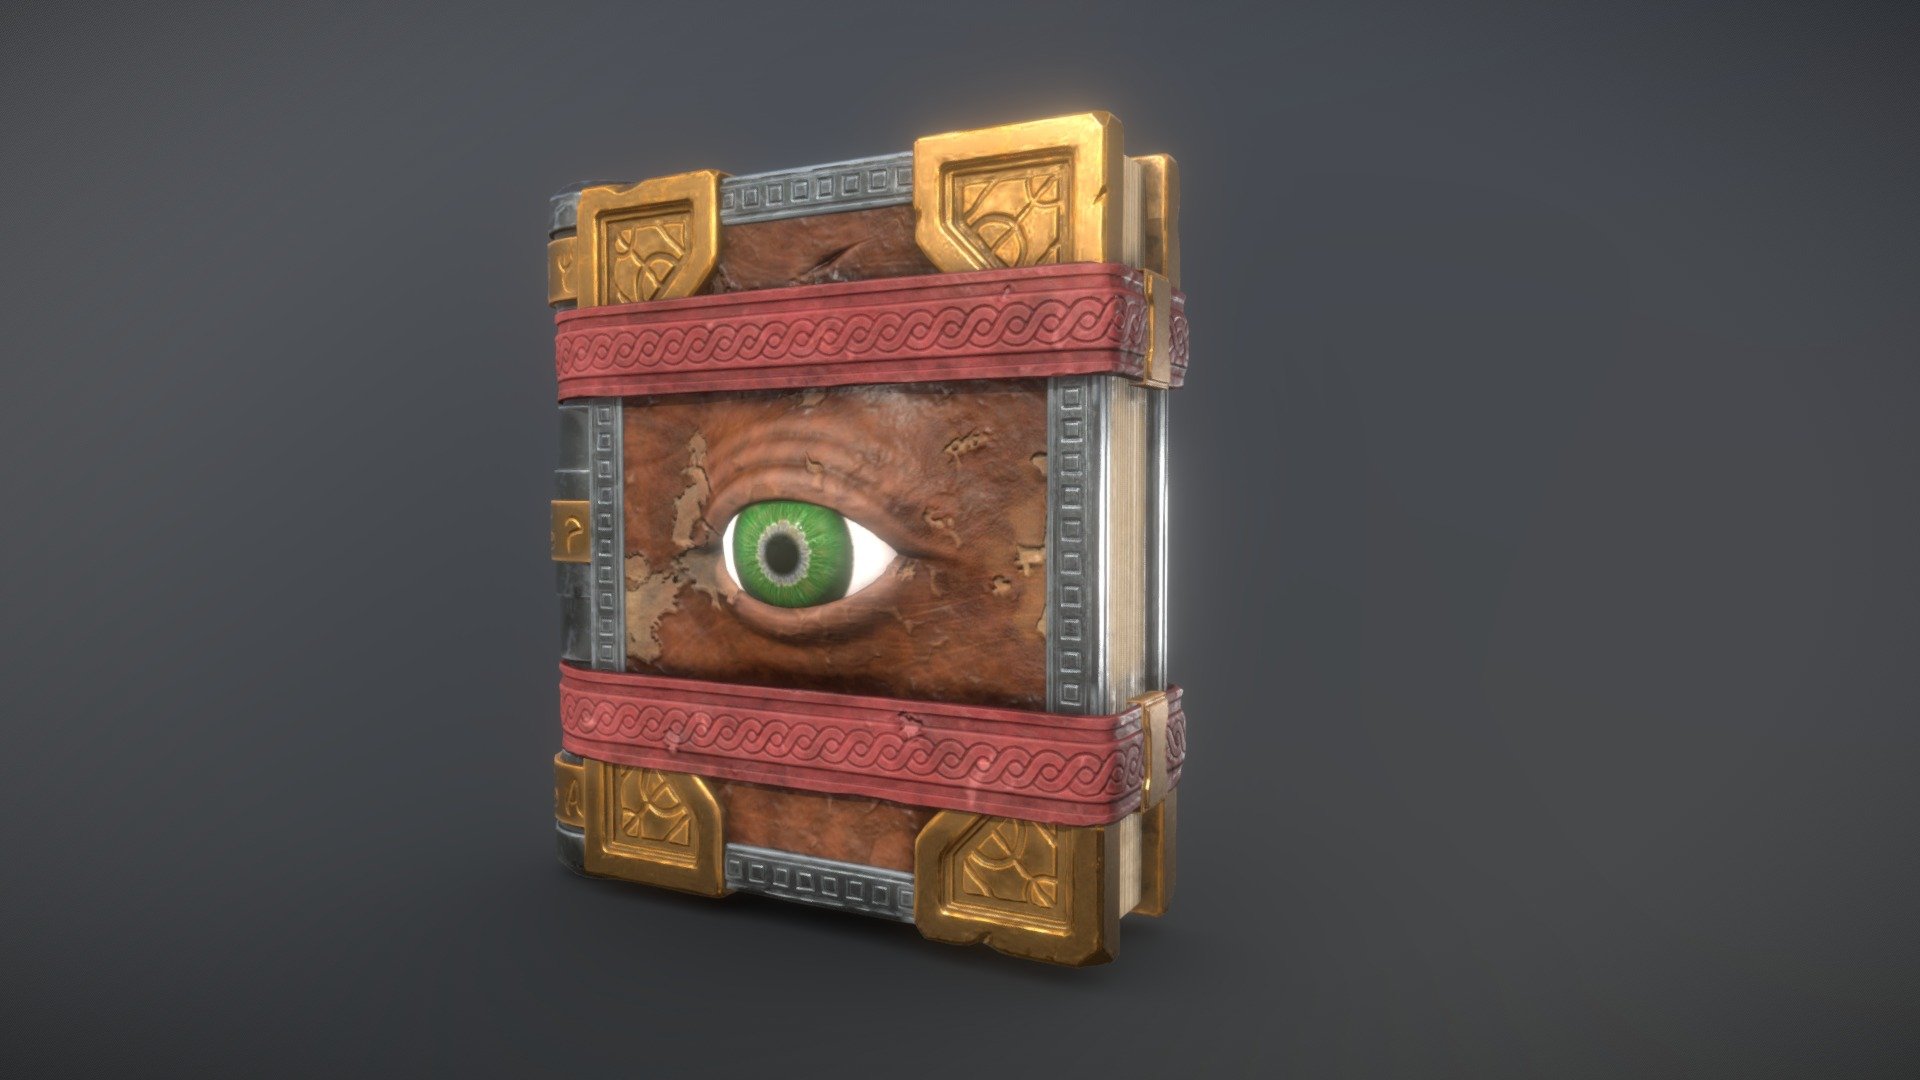 Monster Book low poly and game ready 3D model

PBR 4K texture sets including -Base Color -Normal map -Metallic -Roughness -AO

Hope you like it, Be sure to check out my other 3D models if you get a chance - Monster Book - Buy Royalty Free 3D model by captainapoc 3d model